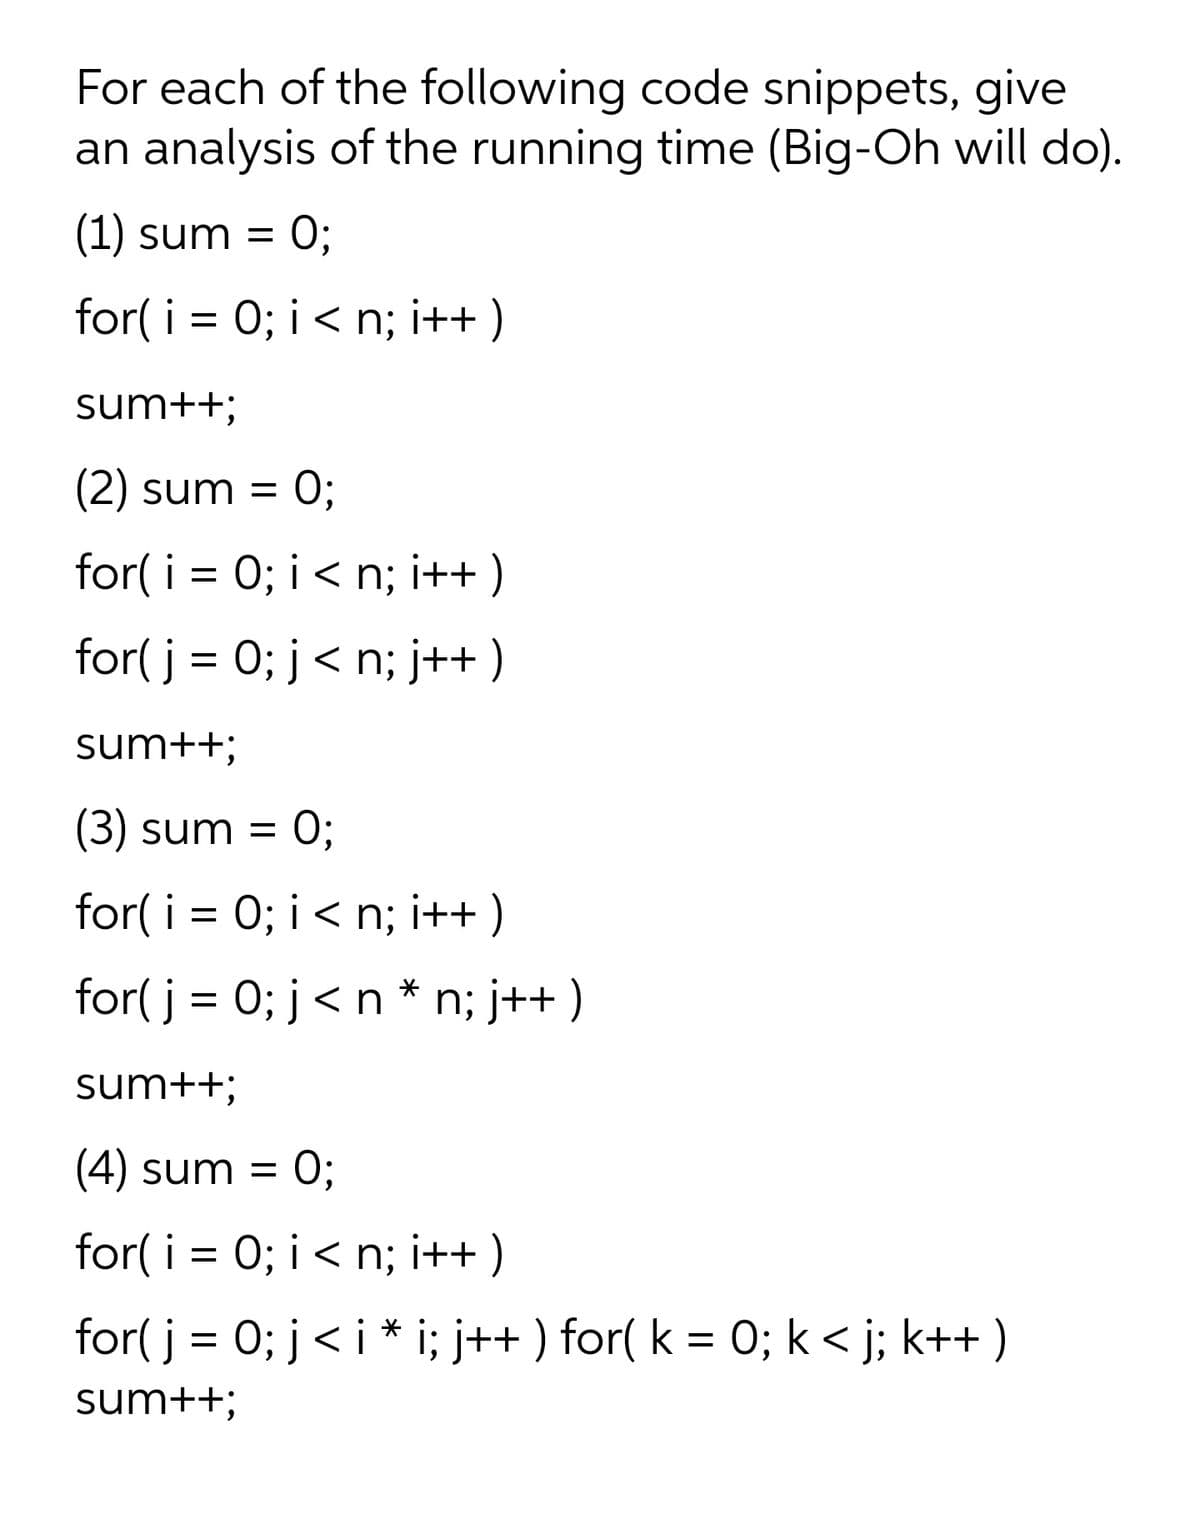 For each of the following code snippets, give
an analysis of the running time (Big-Oh will do).
(1) sum =
O;
for( i = 0; i < n; i++)
sum++;
(2) sum =
:0;
for( i = 0; i< n; i++ )
for( j = 0; j< n; j++)
sum++;
(3) sum =
:0;
for( i = 0; i< n; i++ )
for( j = 0; j<n * n; j++ )
sum++;
(4) sum =
:0;
for( i = 0; i < n; i++ )
for( j = 0; j< i * i; j++ ) for( k = 0; k< j; k++ )
sum++;
